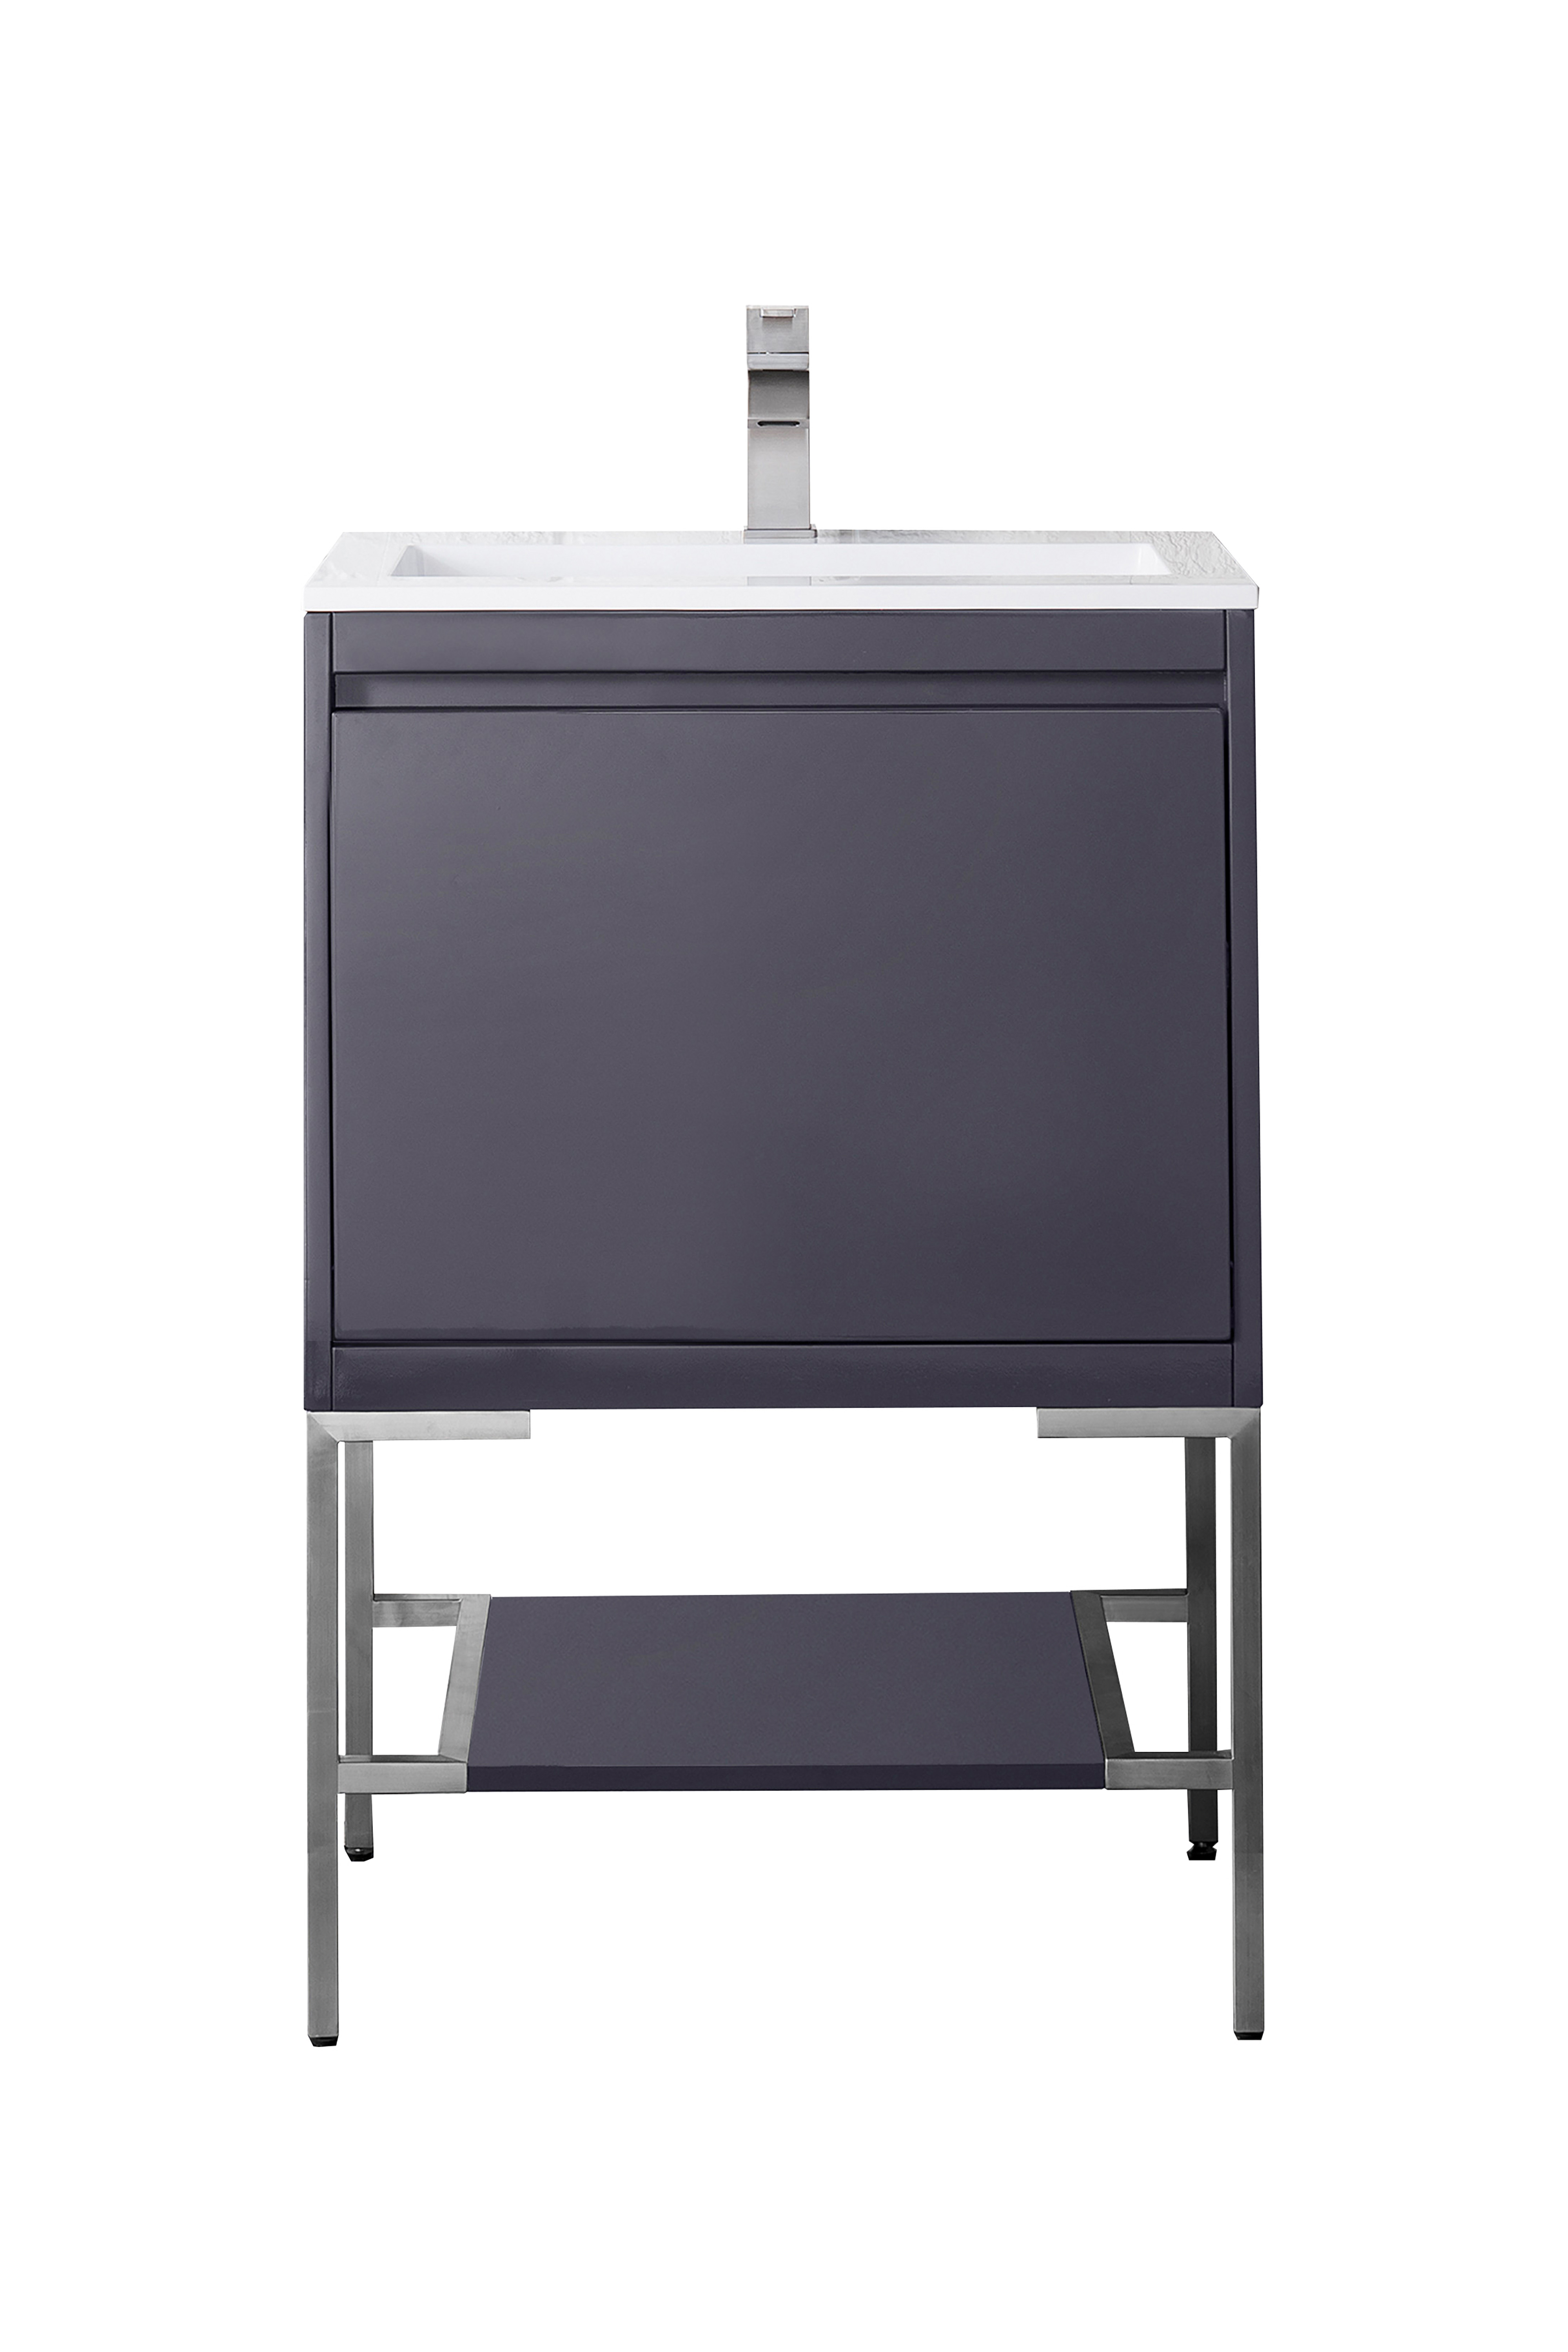 James Martin 801V23.6MGGBNKGW Milan 23.6" Single Vanity Cabinet, Modern Grey Glossy, Brushed Nickel w/Glossy White Composite Top